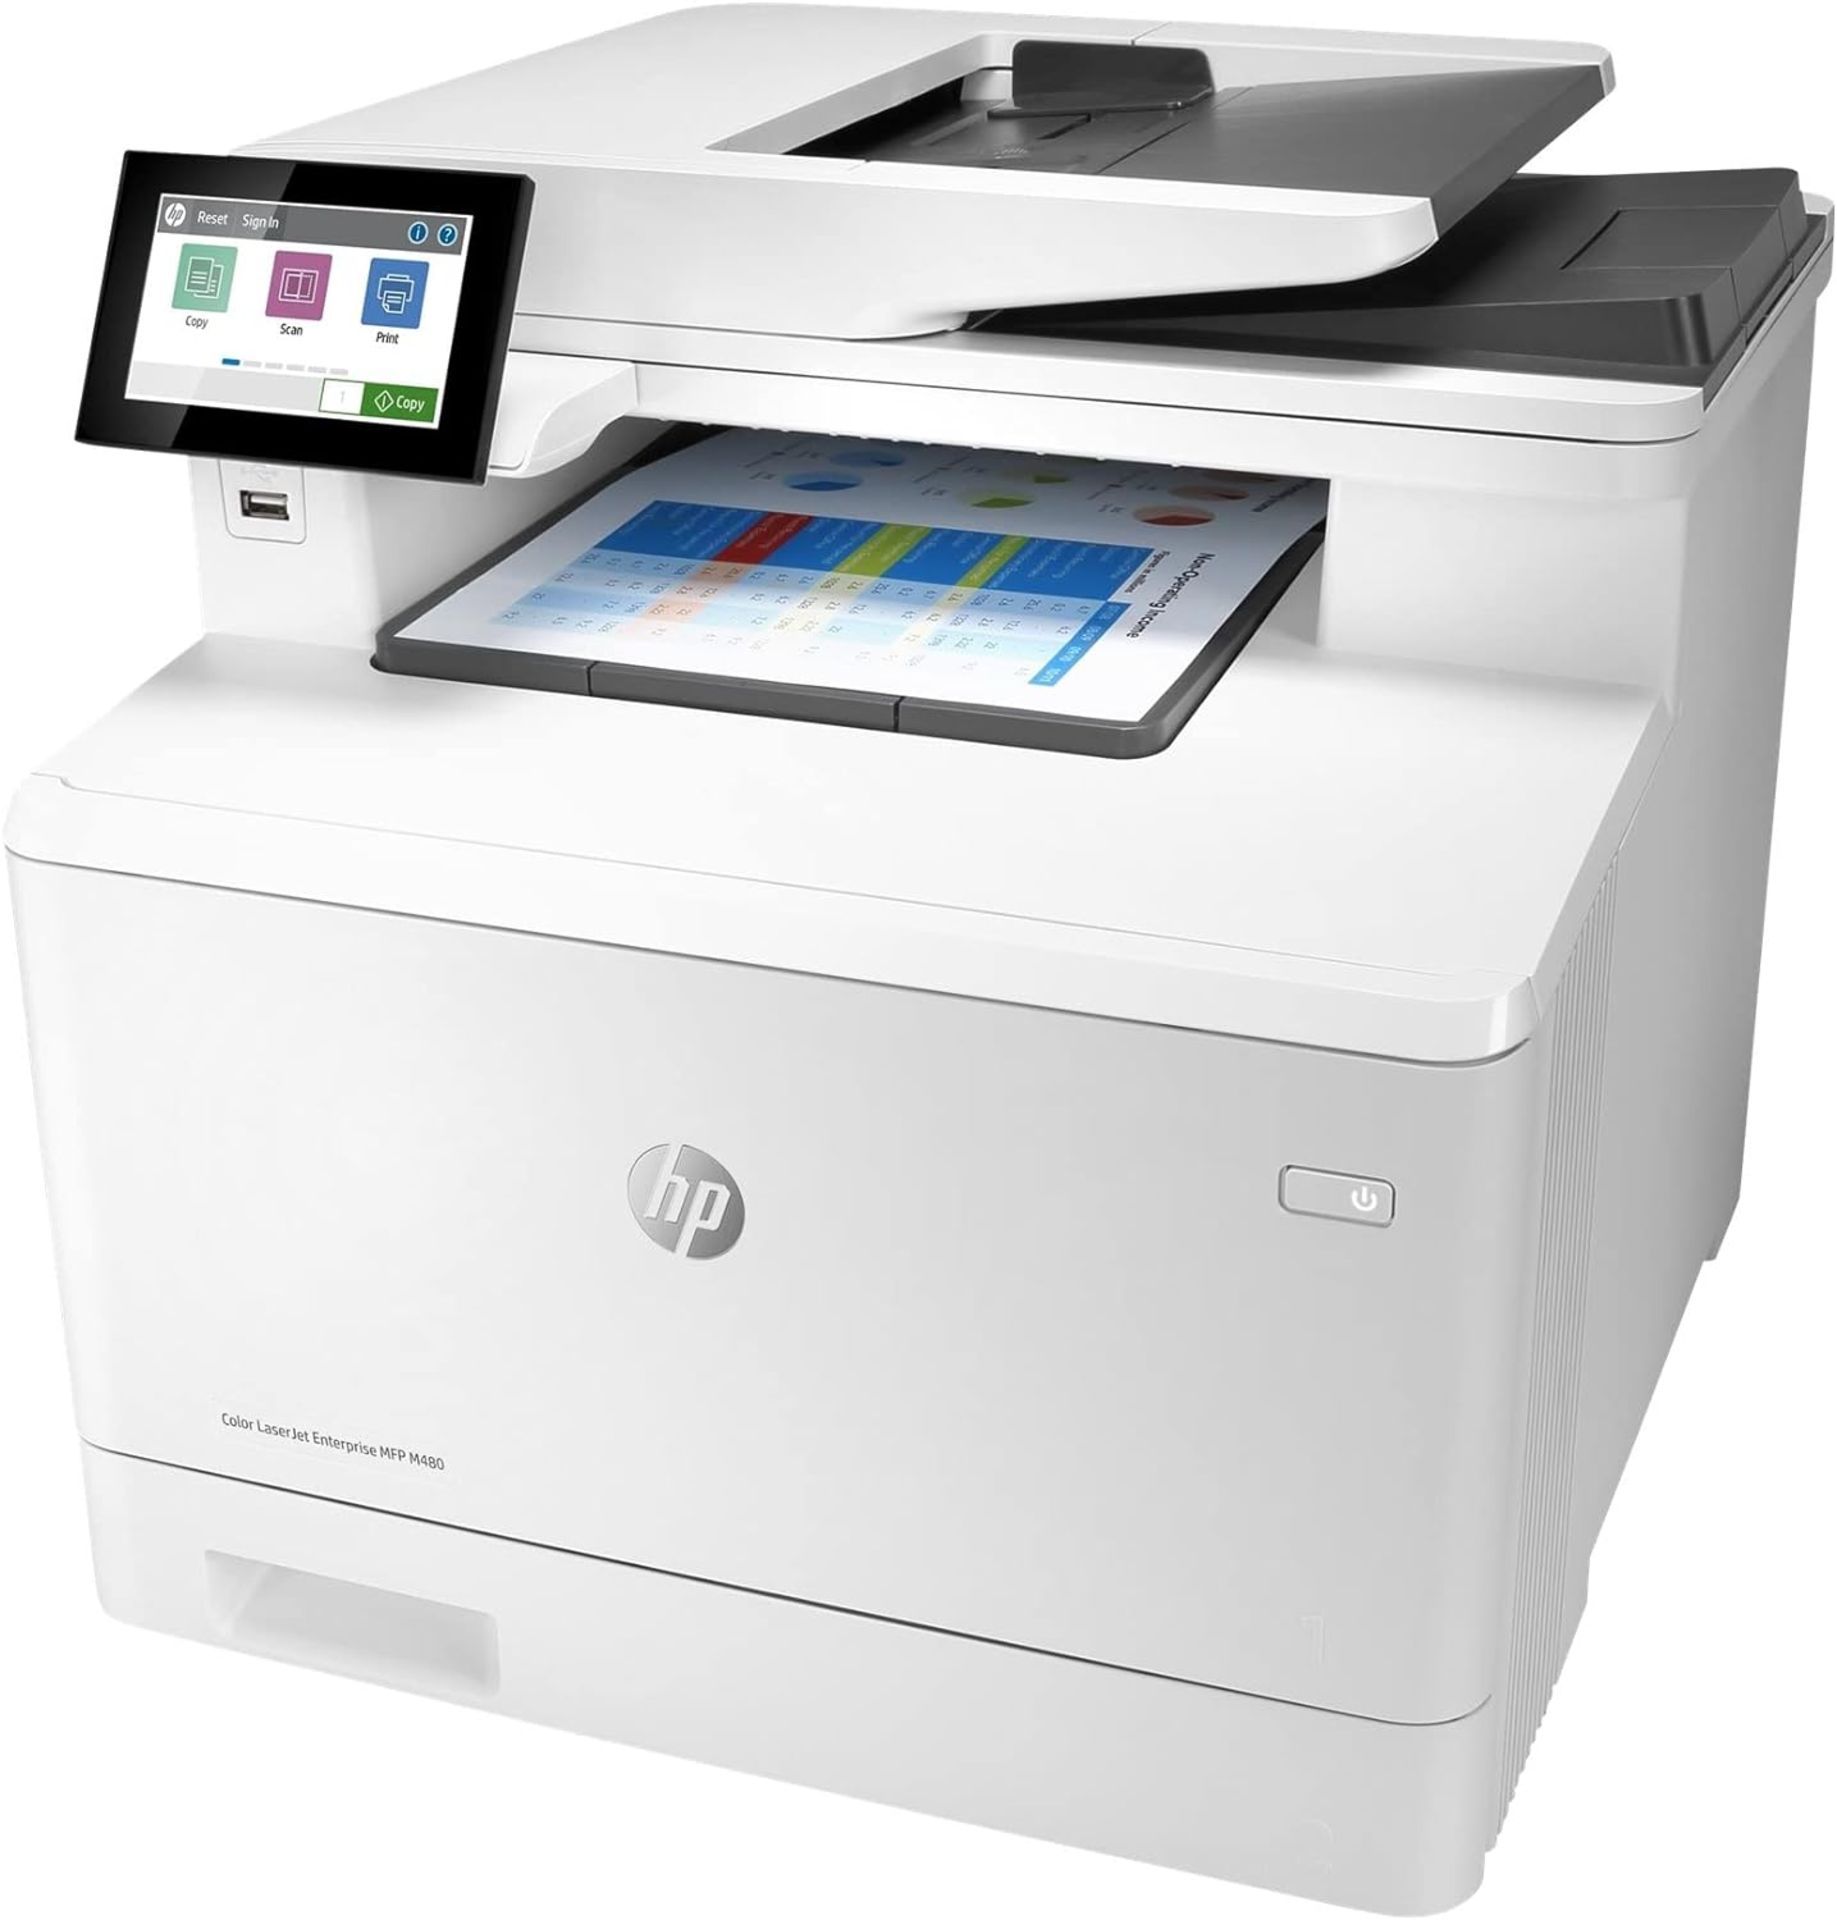 GRADE A HP Color LaserJet Enterprise MFP M480f. RRP £643. (PCK5). This printer is intended for use - Image 6 of 6